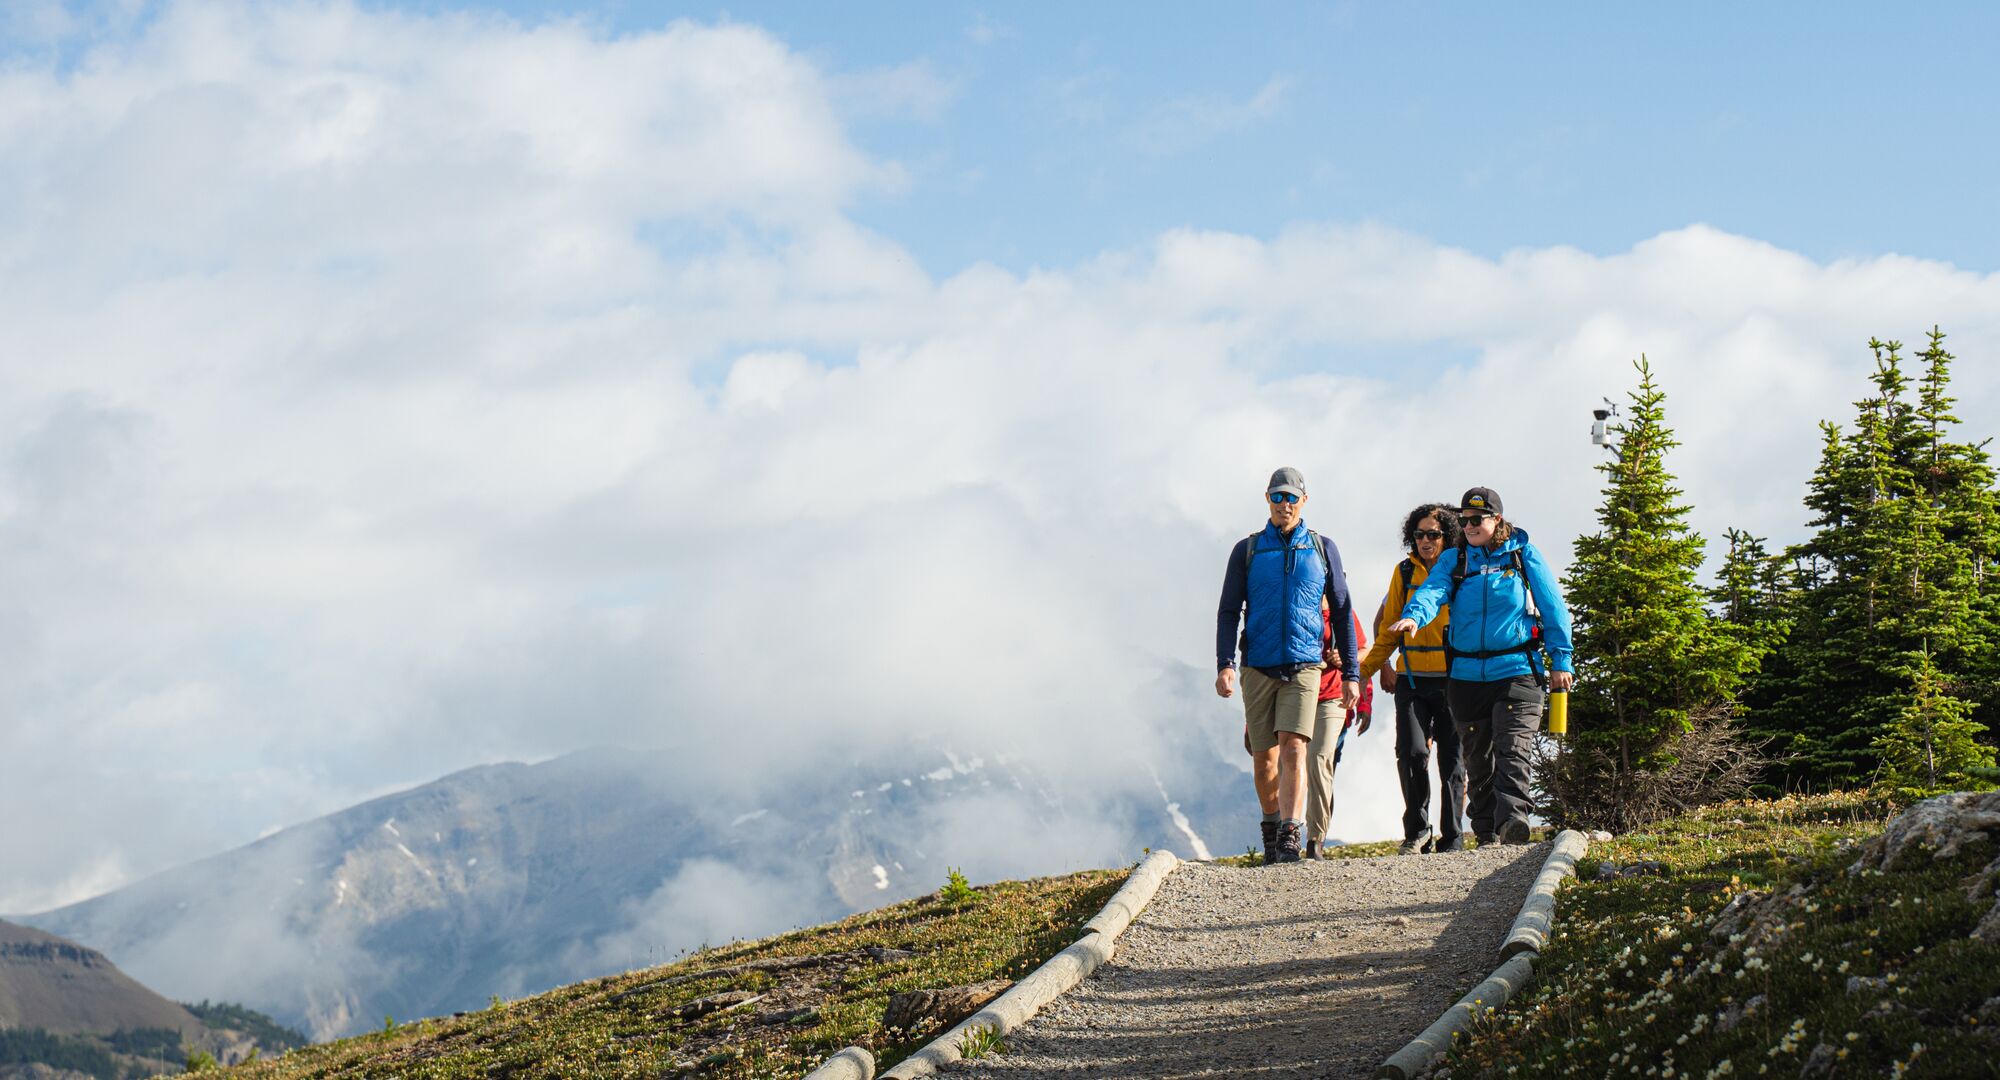 Group of people on a guided hiking tour at Sunshine Meadows in the summer